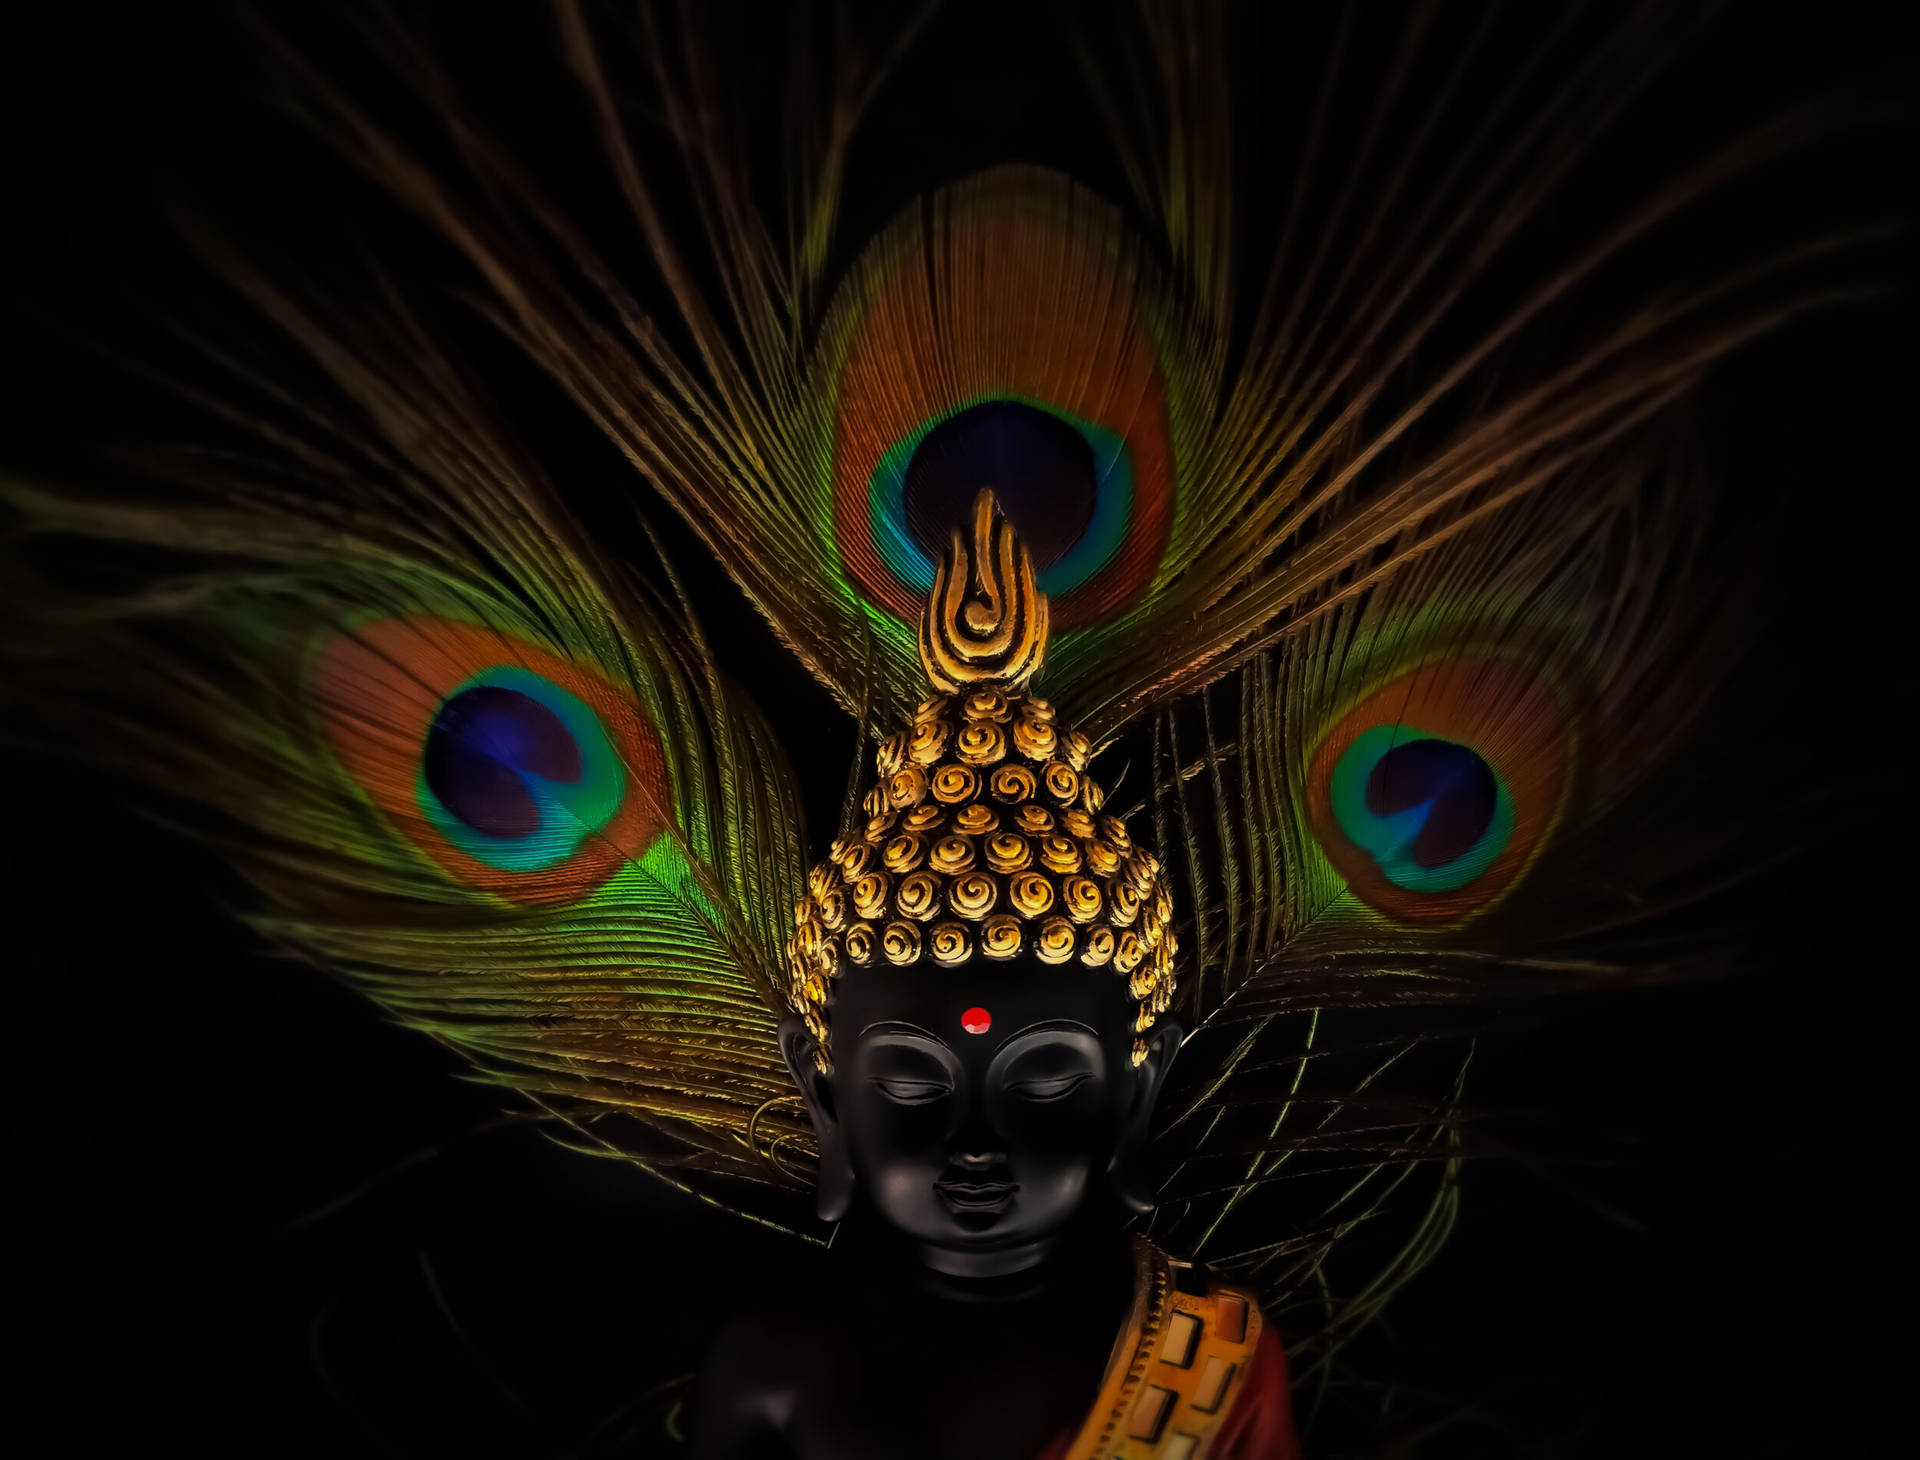 Devotion In Colors: Divine Image Of Vithu Mauli Adorned With Peacock Feathers Background